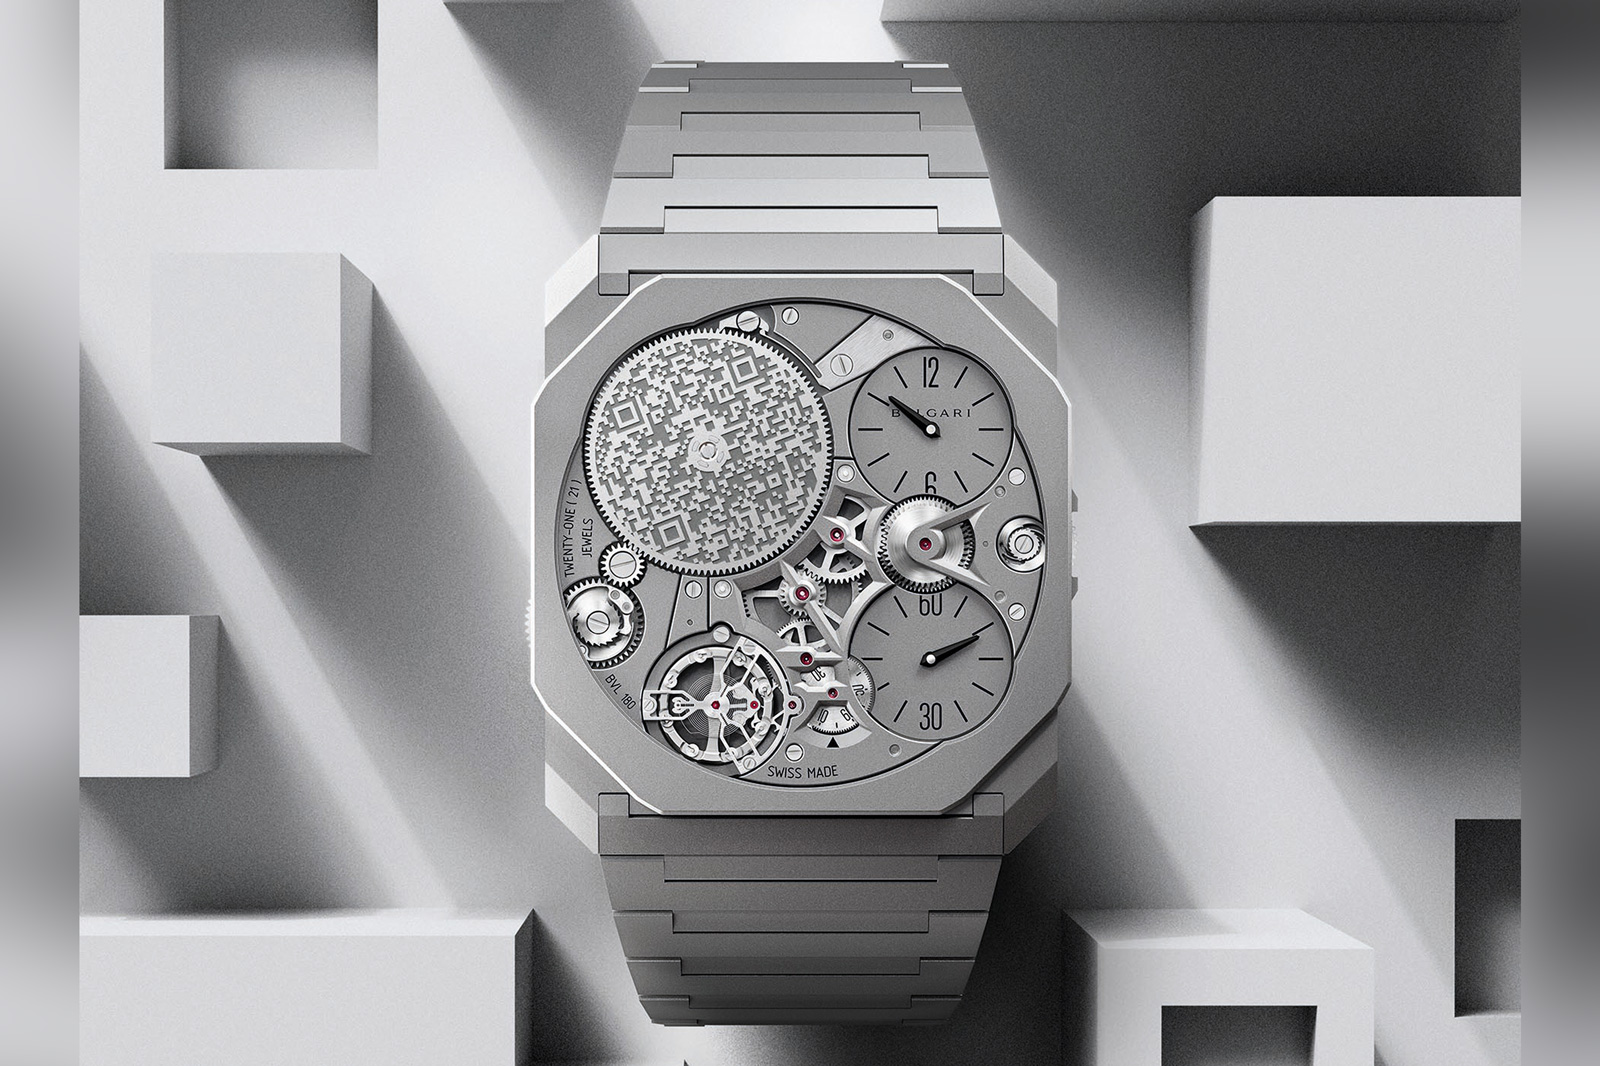 Explained: Bulgari Debuts the Thinnest Mechanical Watch | SJX Watches